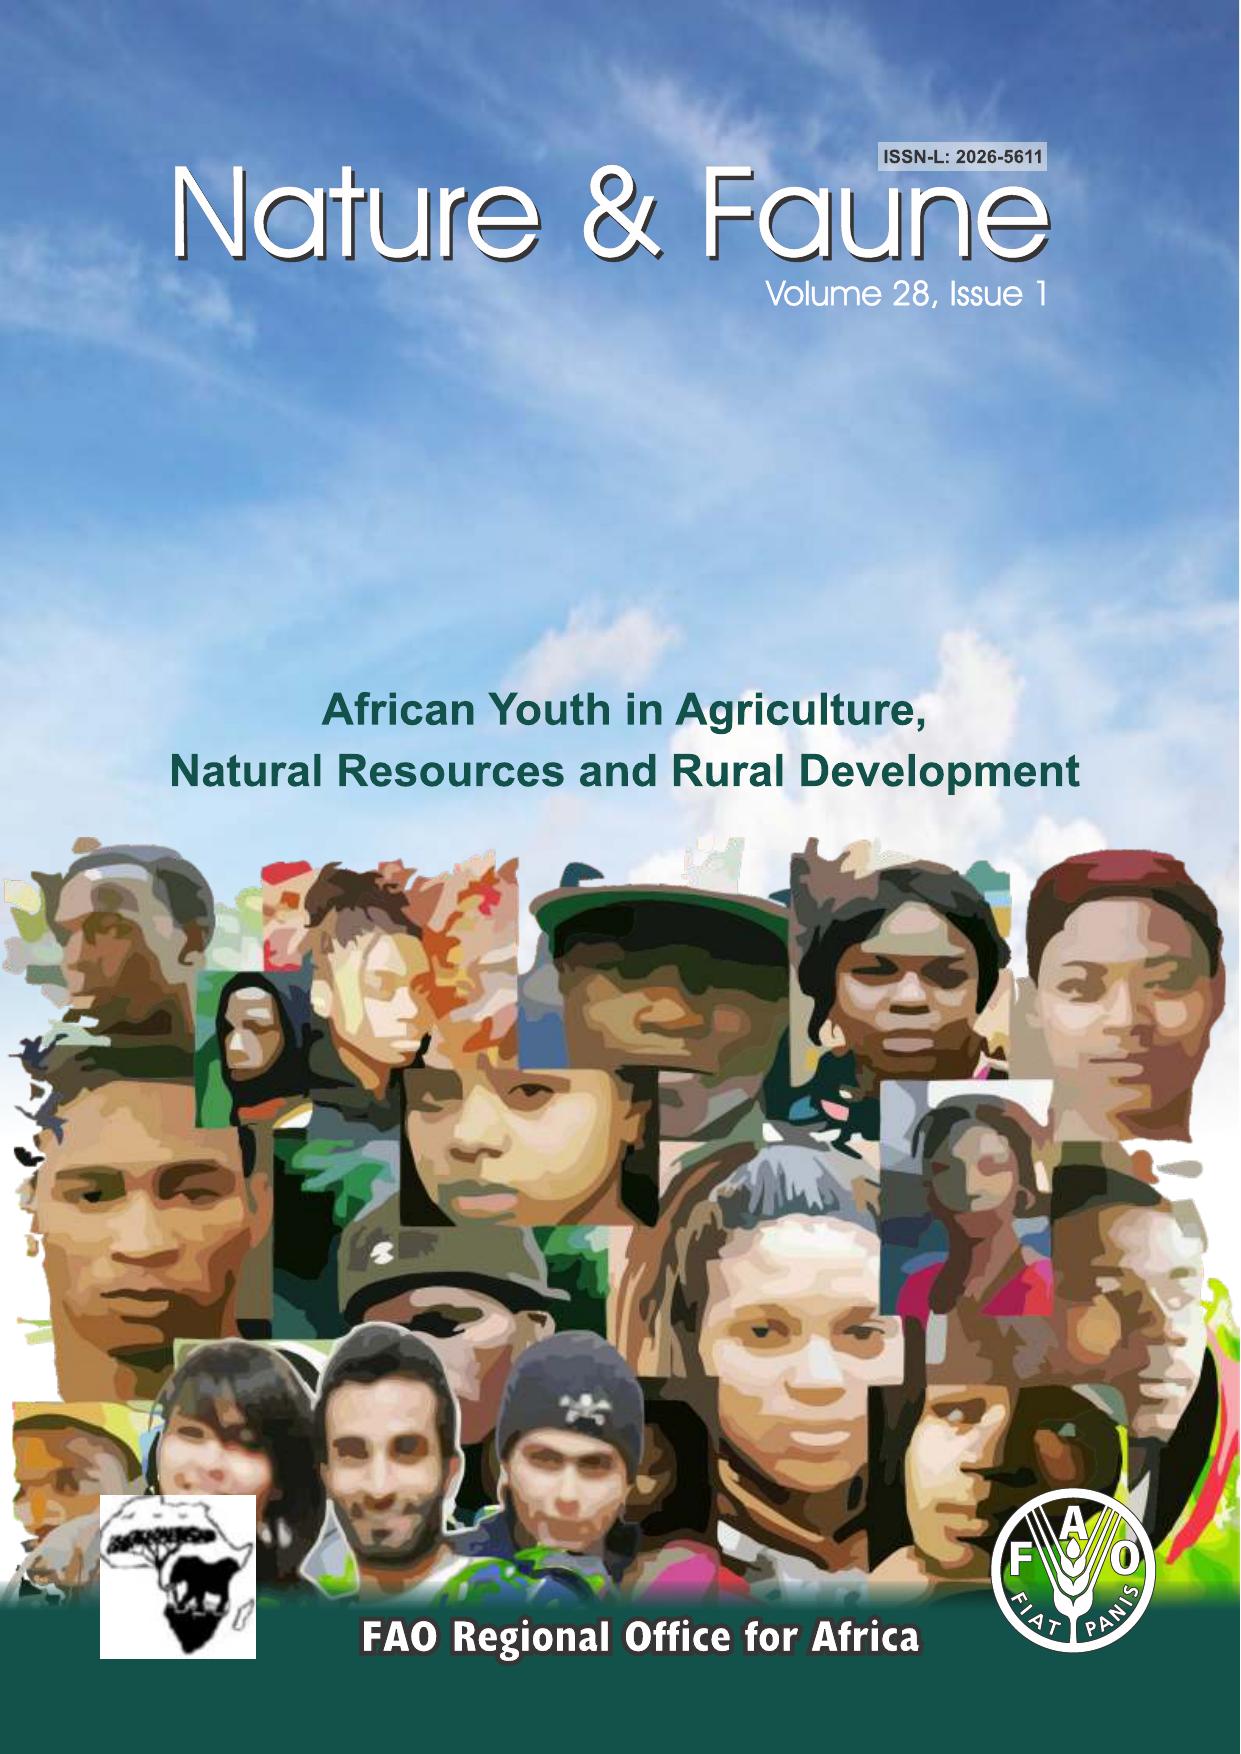 African youth in agriculture, natural resources and rural development - Nature & Faune, vol. 28, issue 1